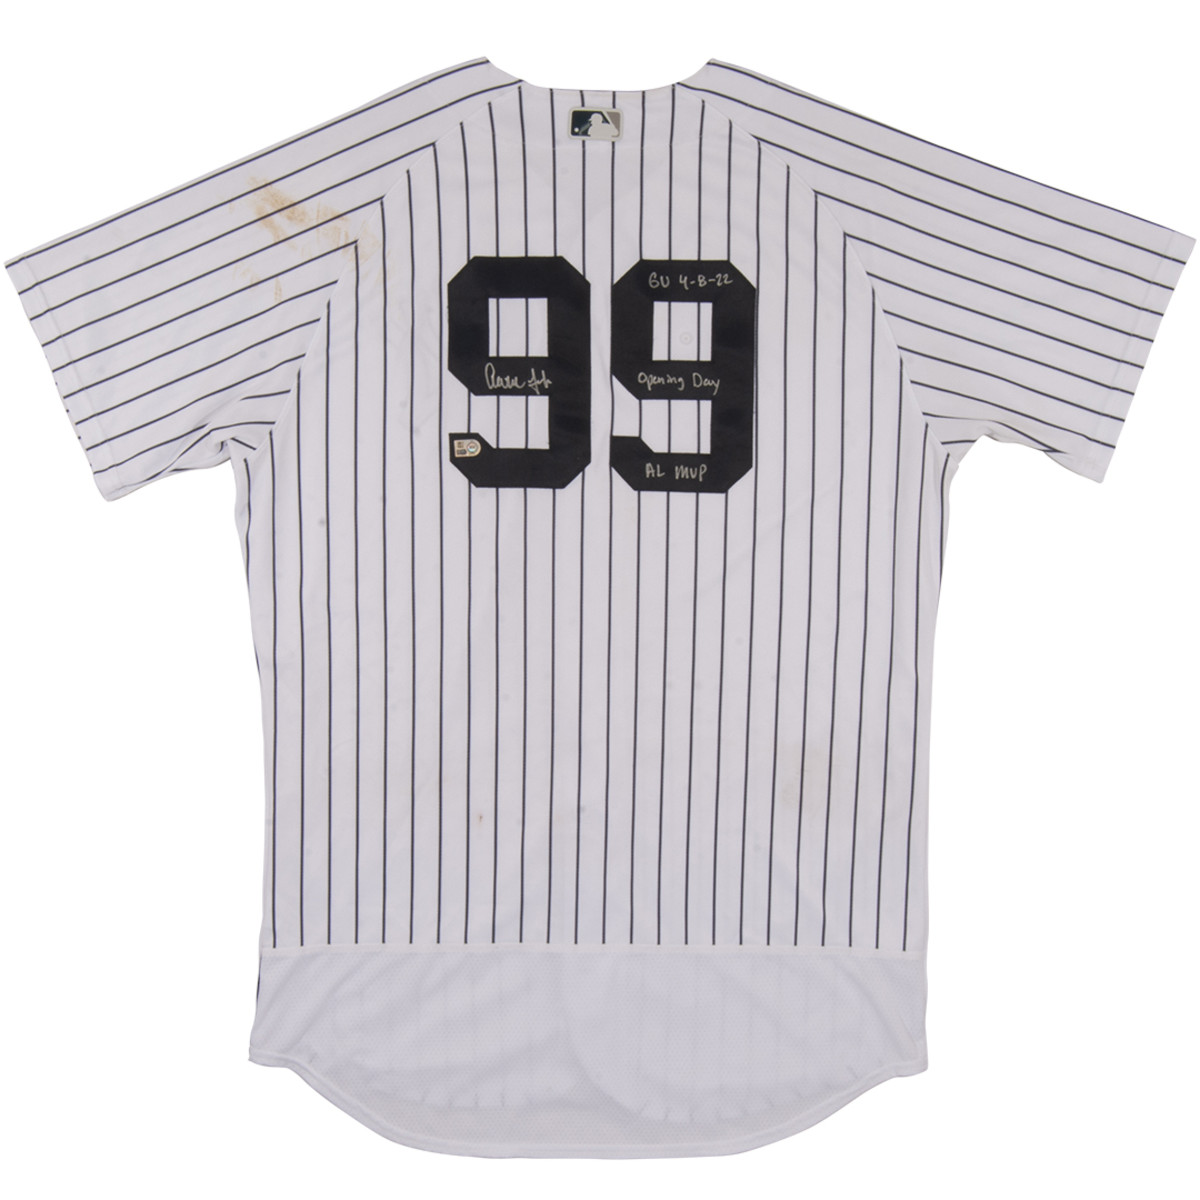 Jackie Robinson Day Jerseys from Yankees Available in Latest SCP Auctions  Sale - Sports Collectors Digest